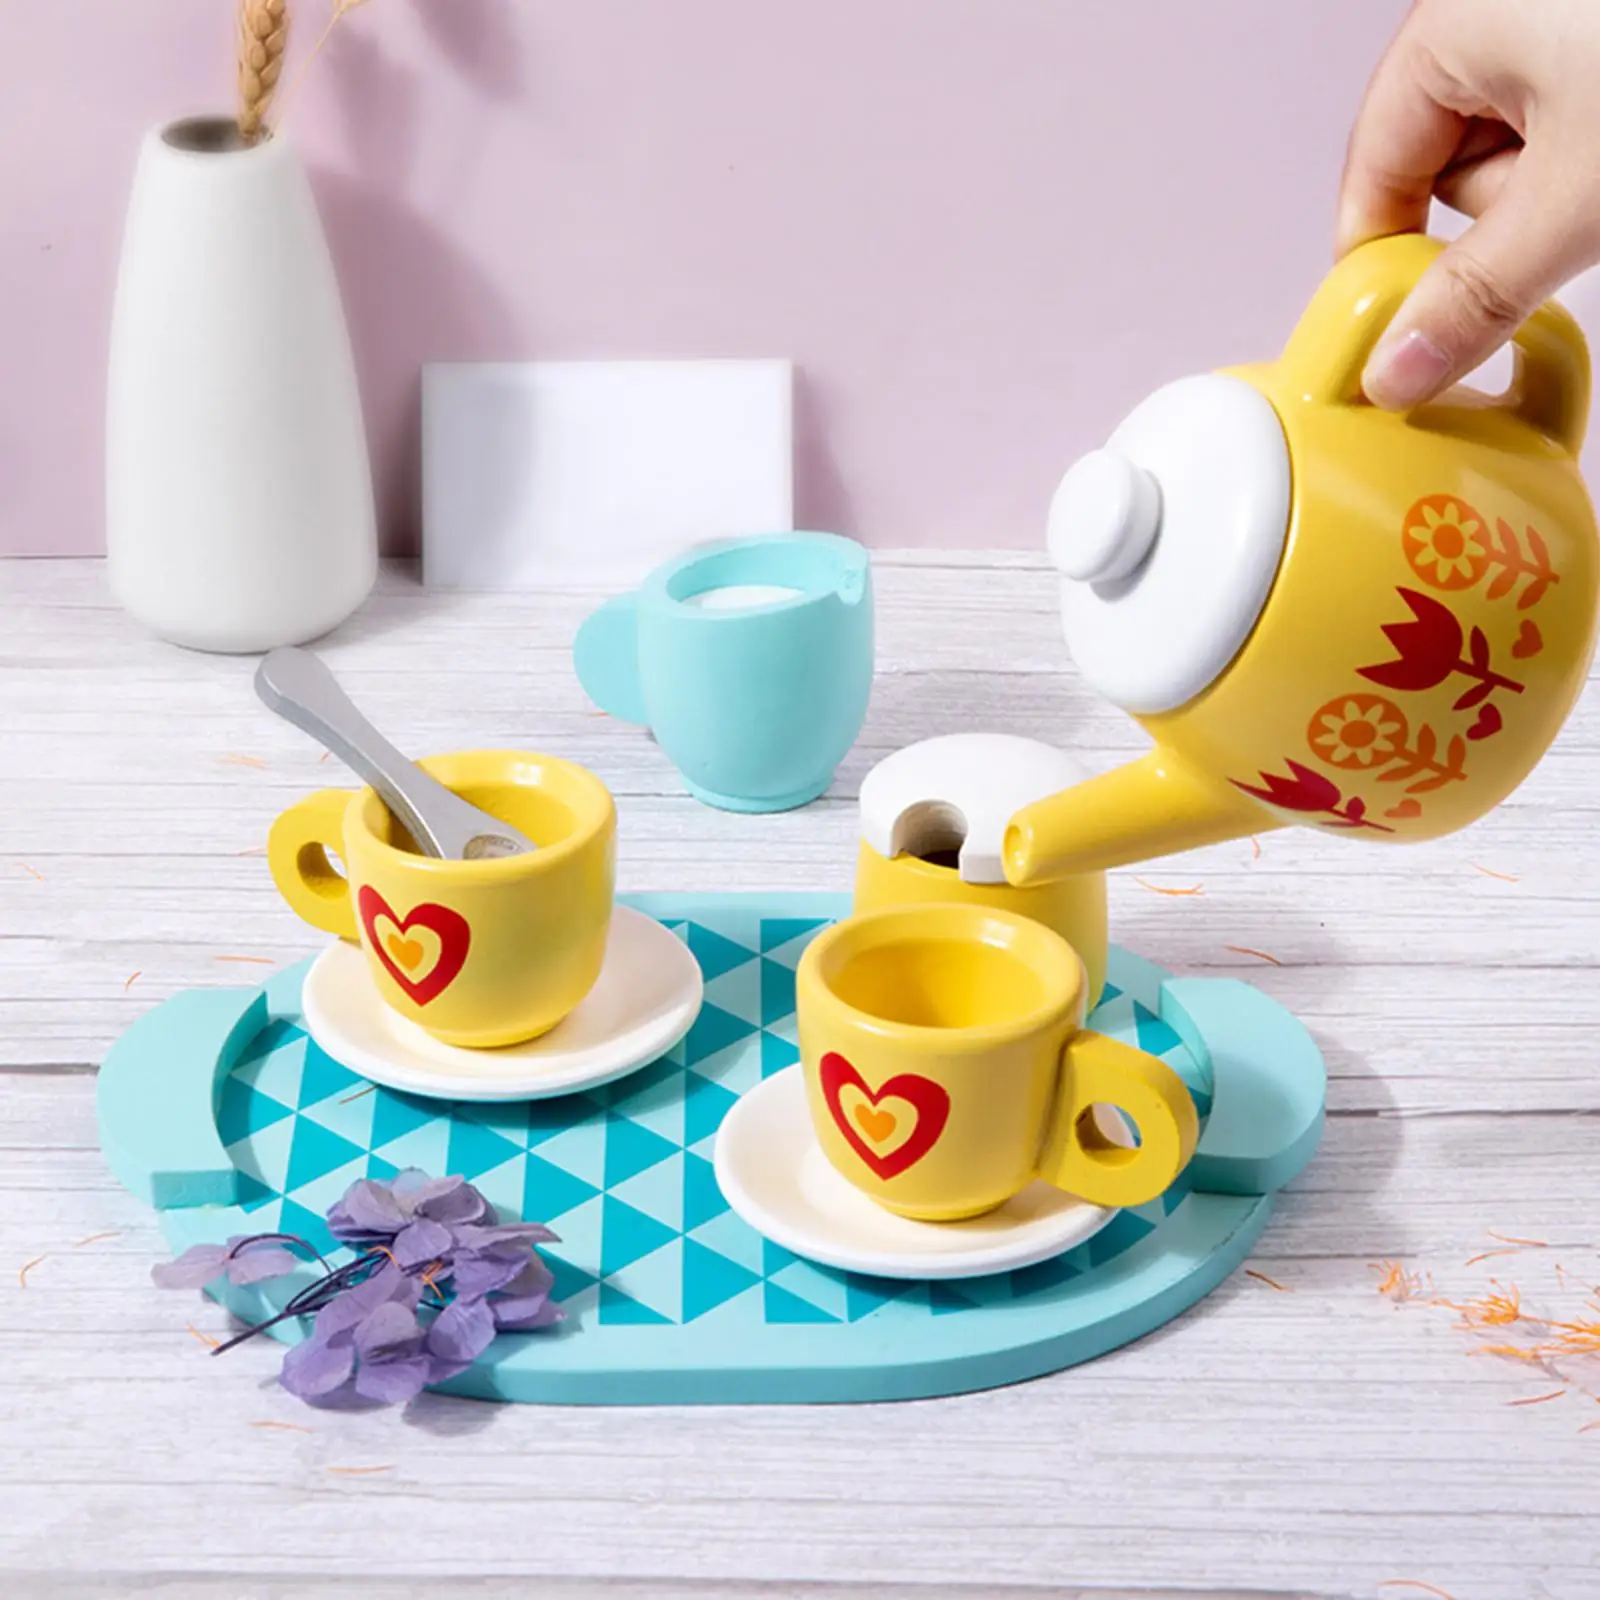 8 Pieces Children Tea Party Set Kitchen Tableware Set for Play Toy Toddlers